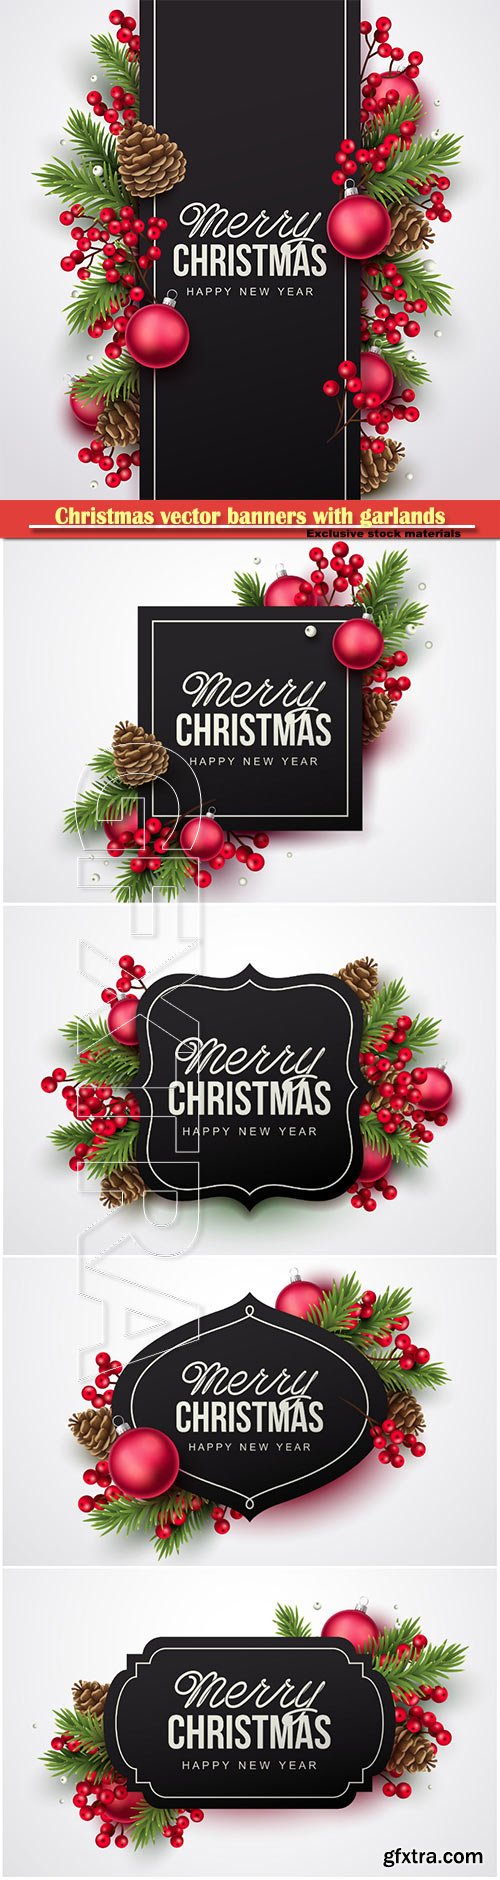 Christmas vector banners with garlands of Christmas trees of cones and balls